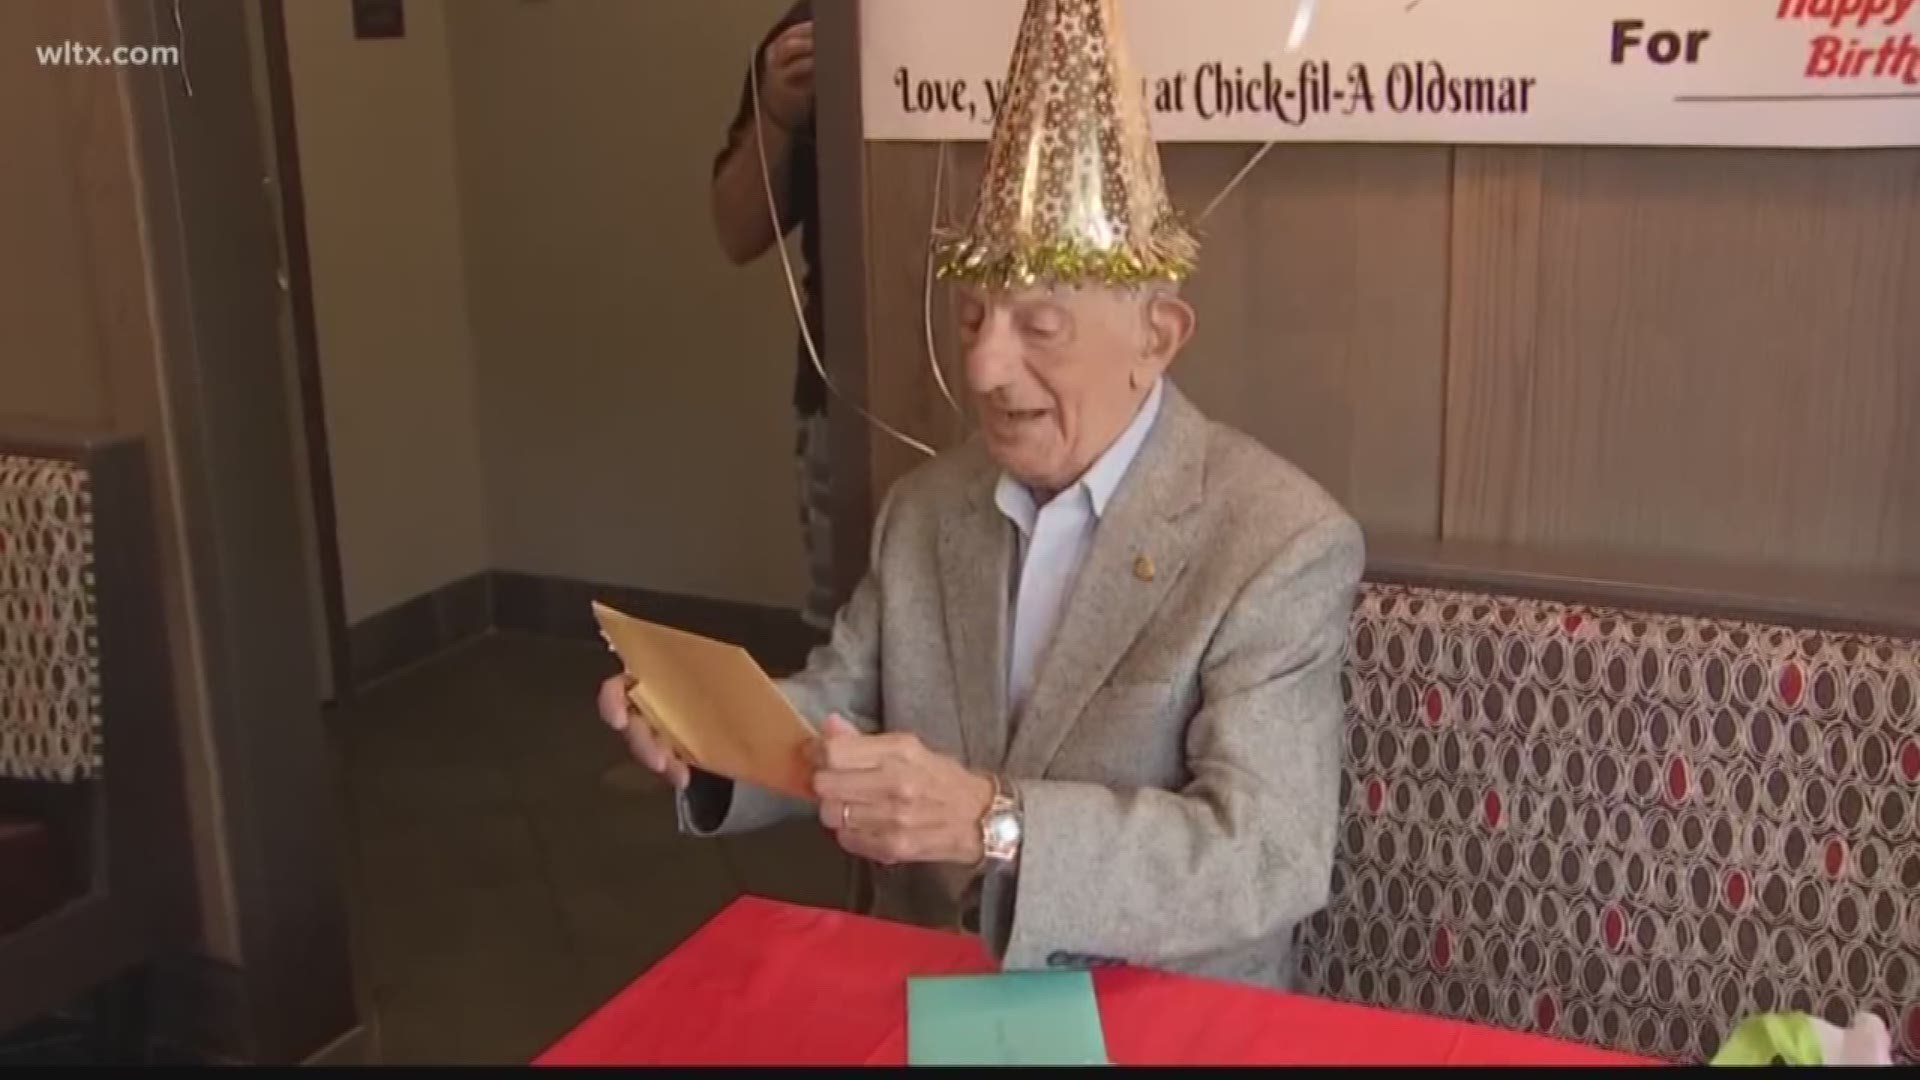 Mr. Steve, who always went to the same Chick-fil-A every day for years, got a special present for his 100th birthday.